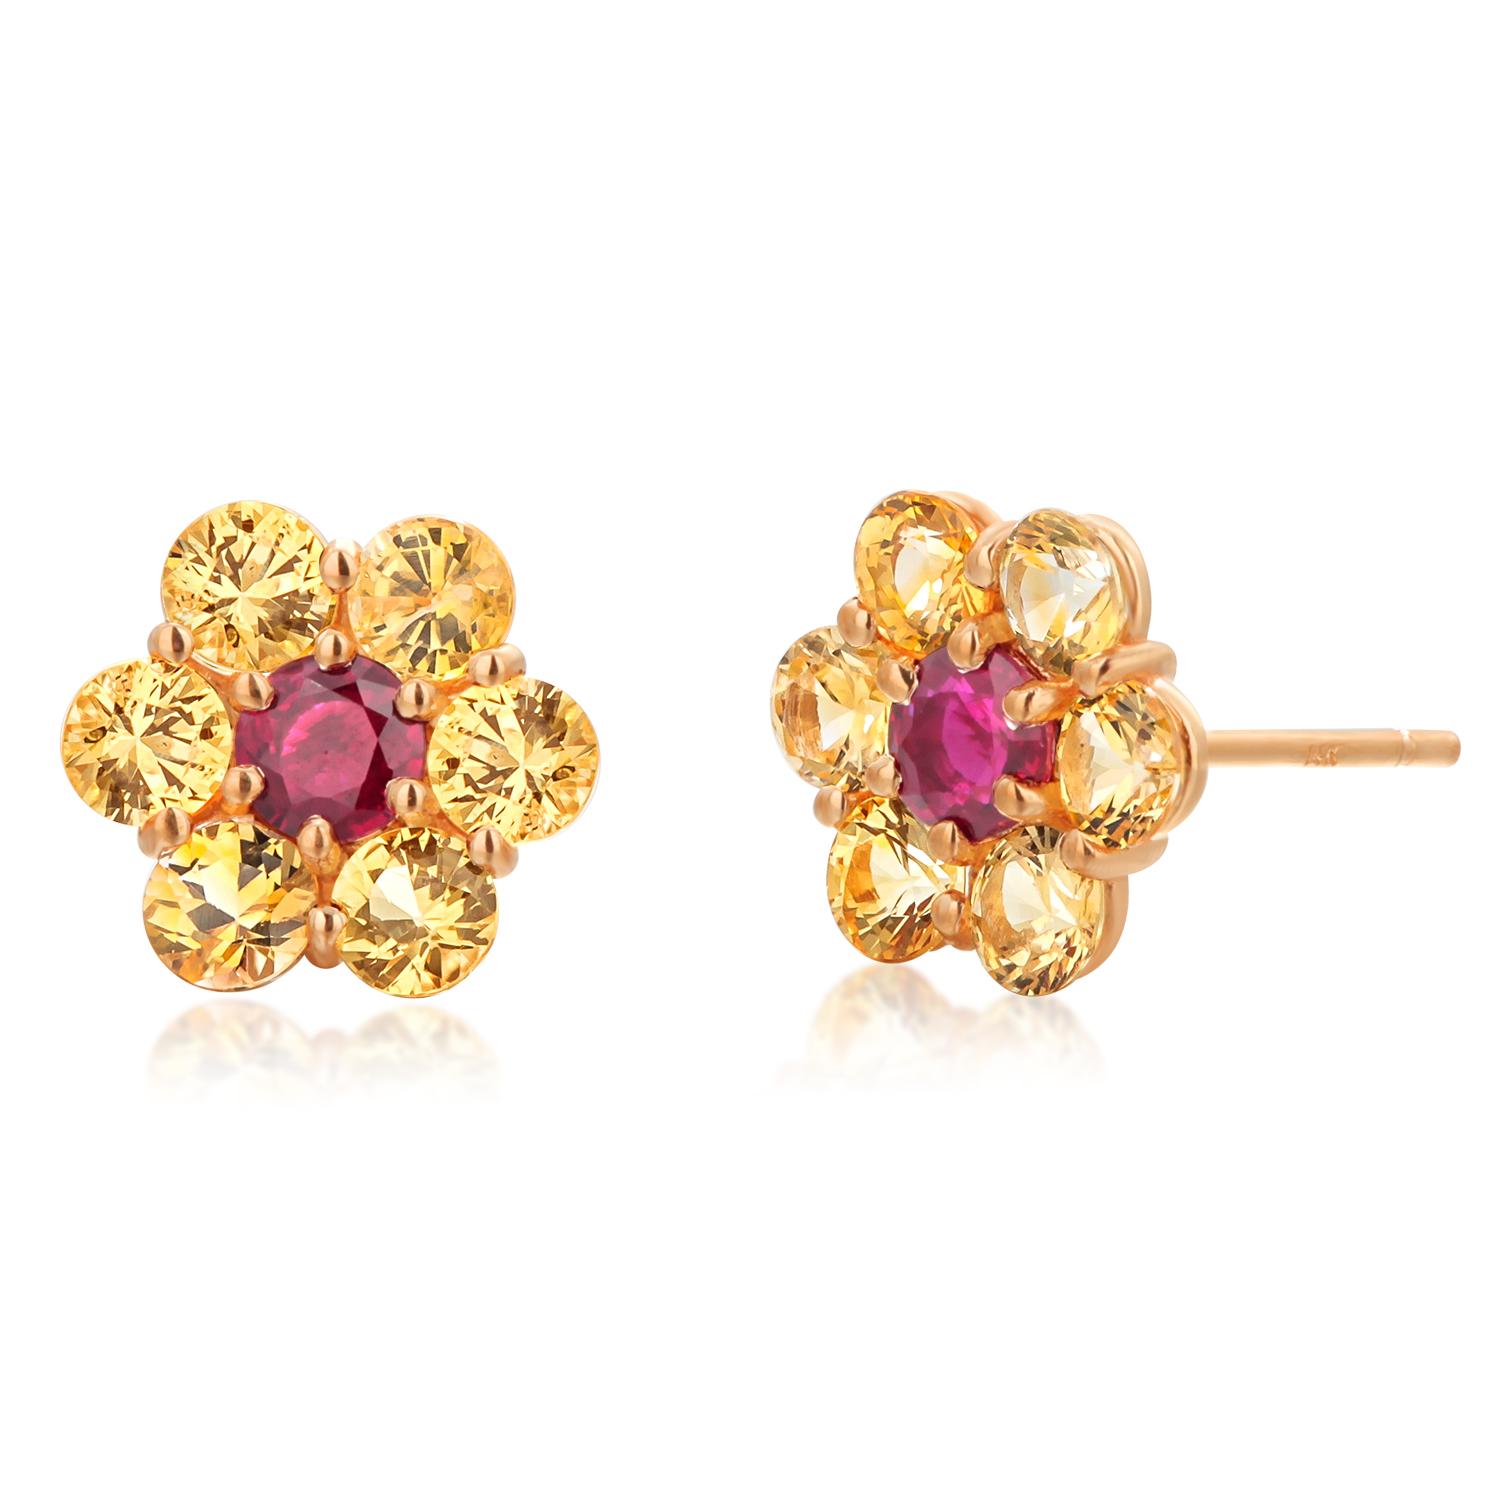 14 Karat Yellow Gold Floral Stud Earrings Yellow Ceylon Sapphires Ruby 0.35 Inch For Sale 2